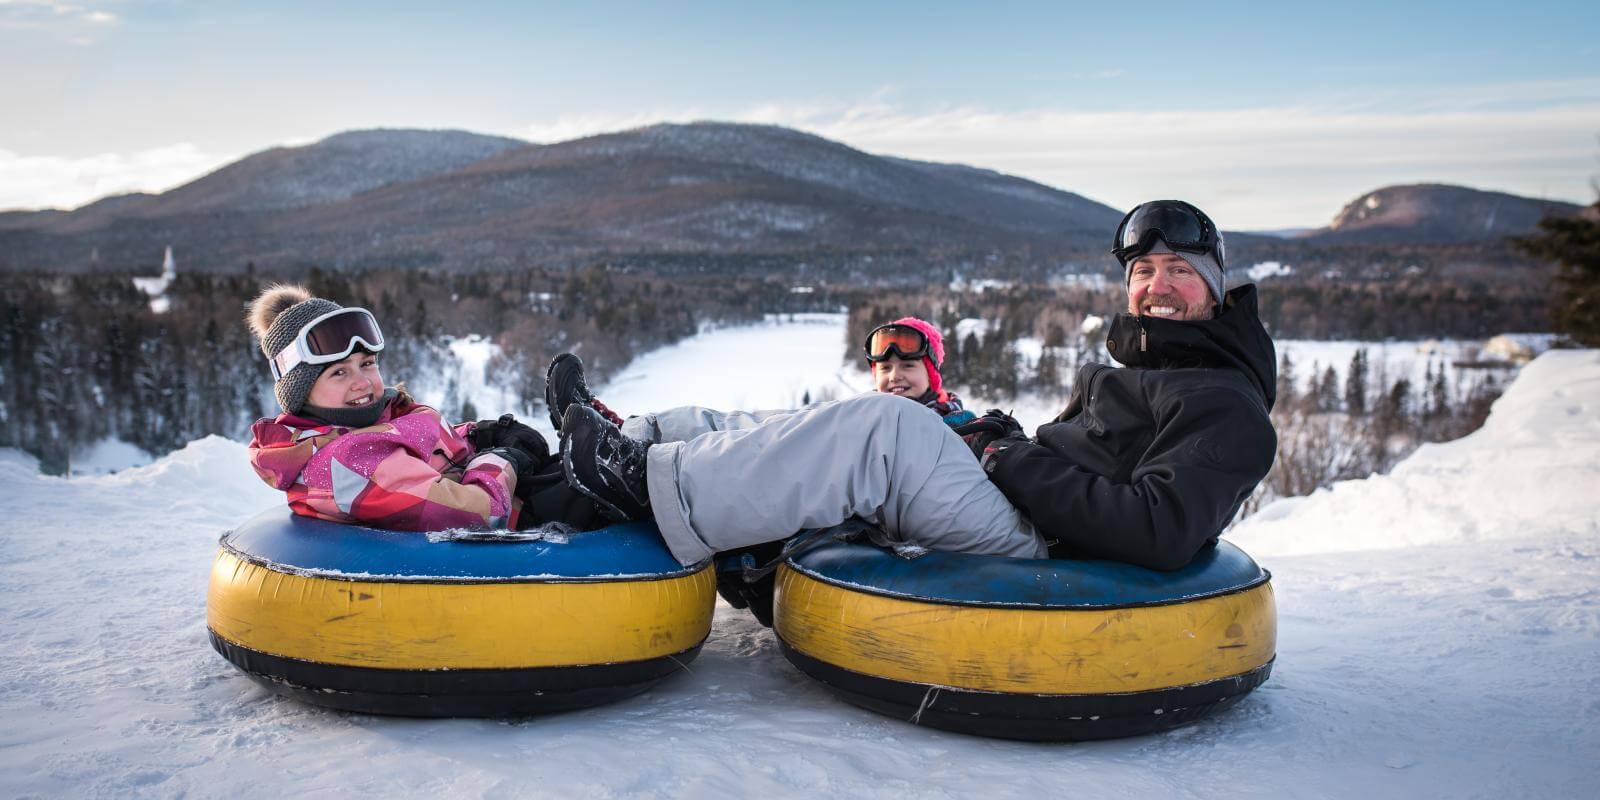 A family is getting ready to slide on inner tubes at Village Vacances Valcartier in winter.